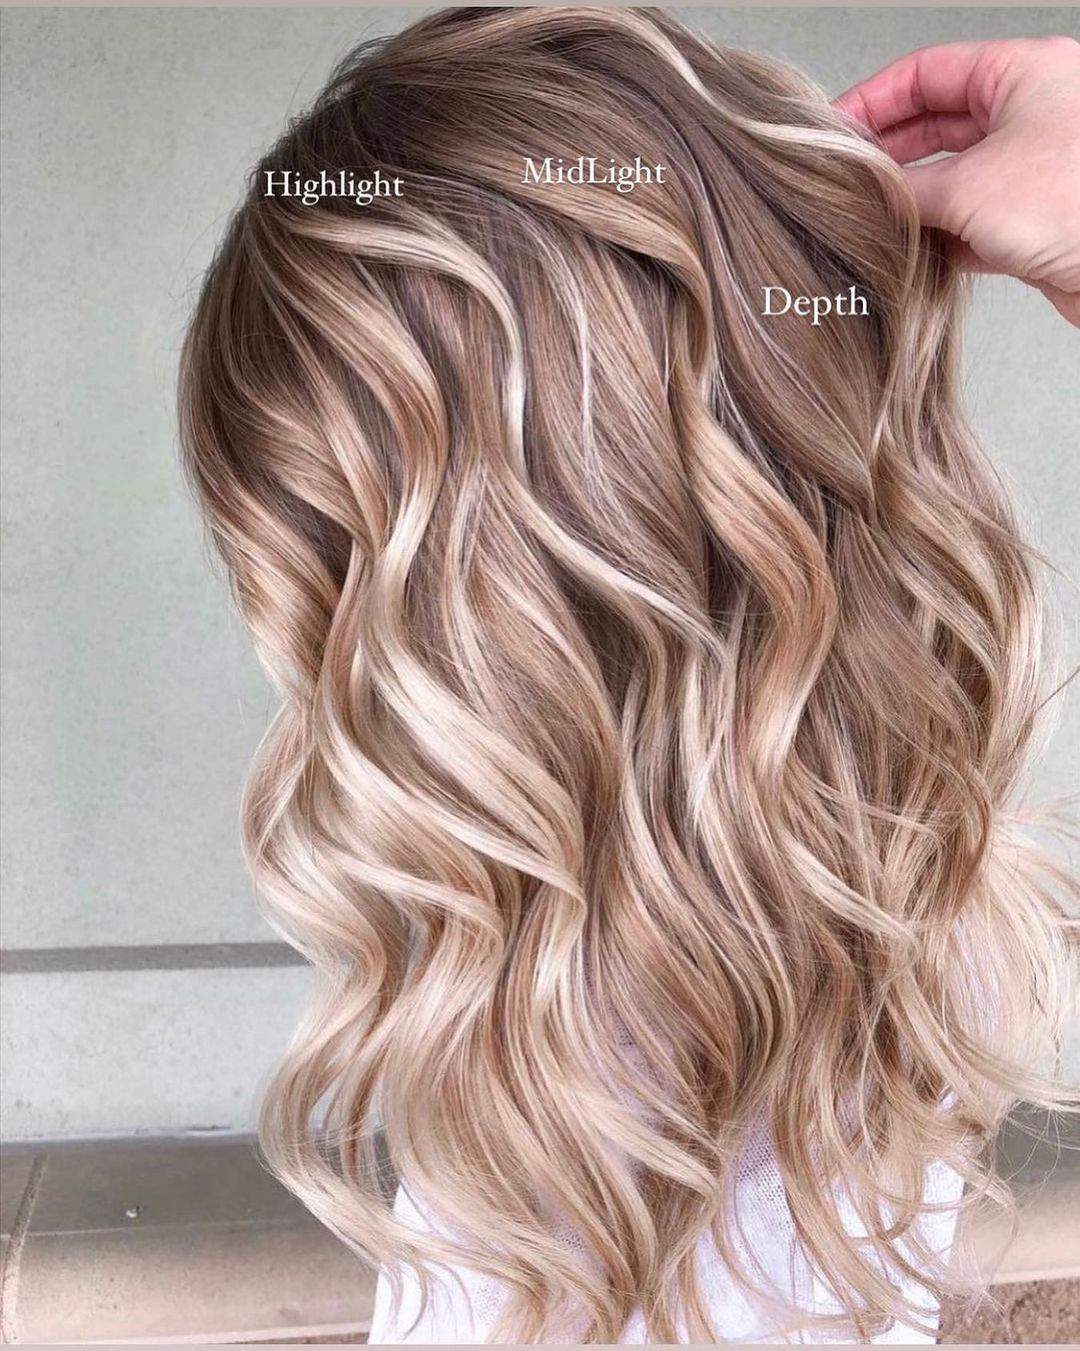 100+ Trendy Hairstyle Ideas For Women To Try In 2021 images 71